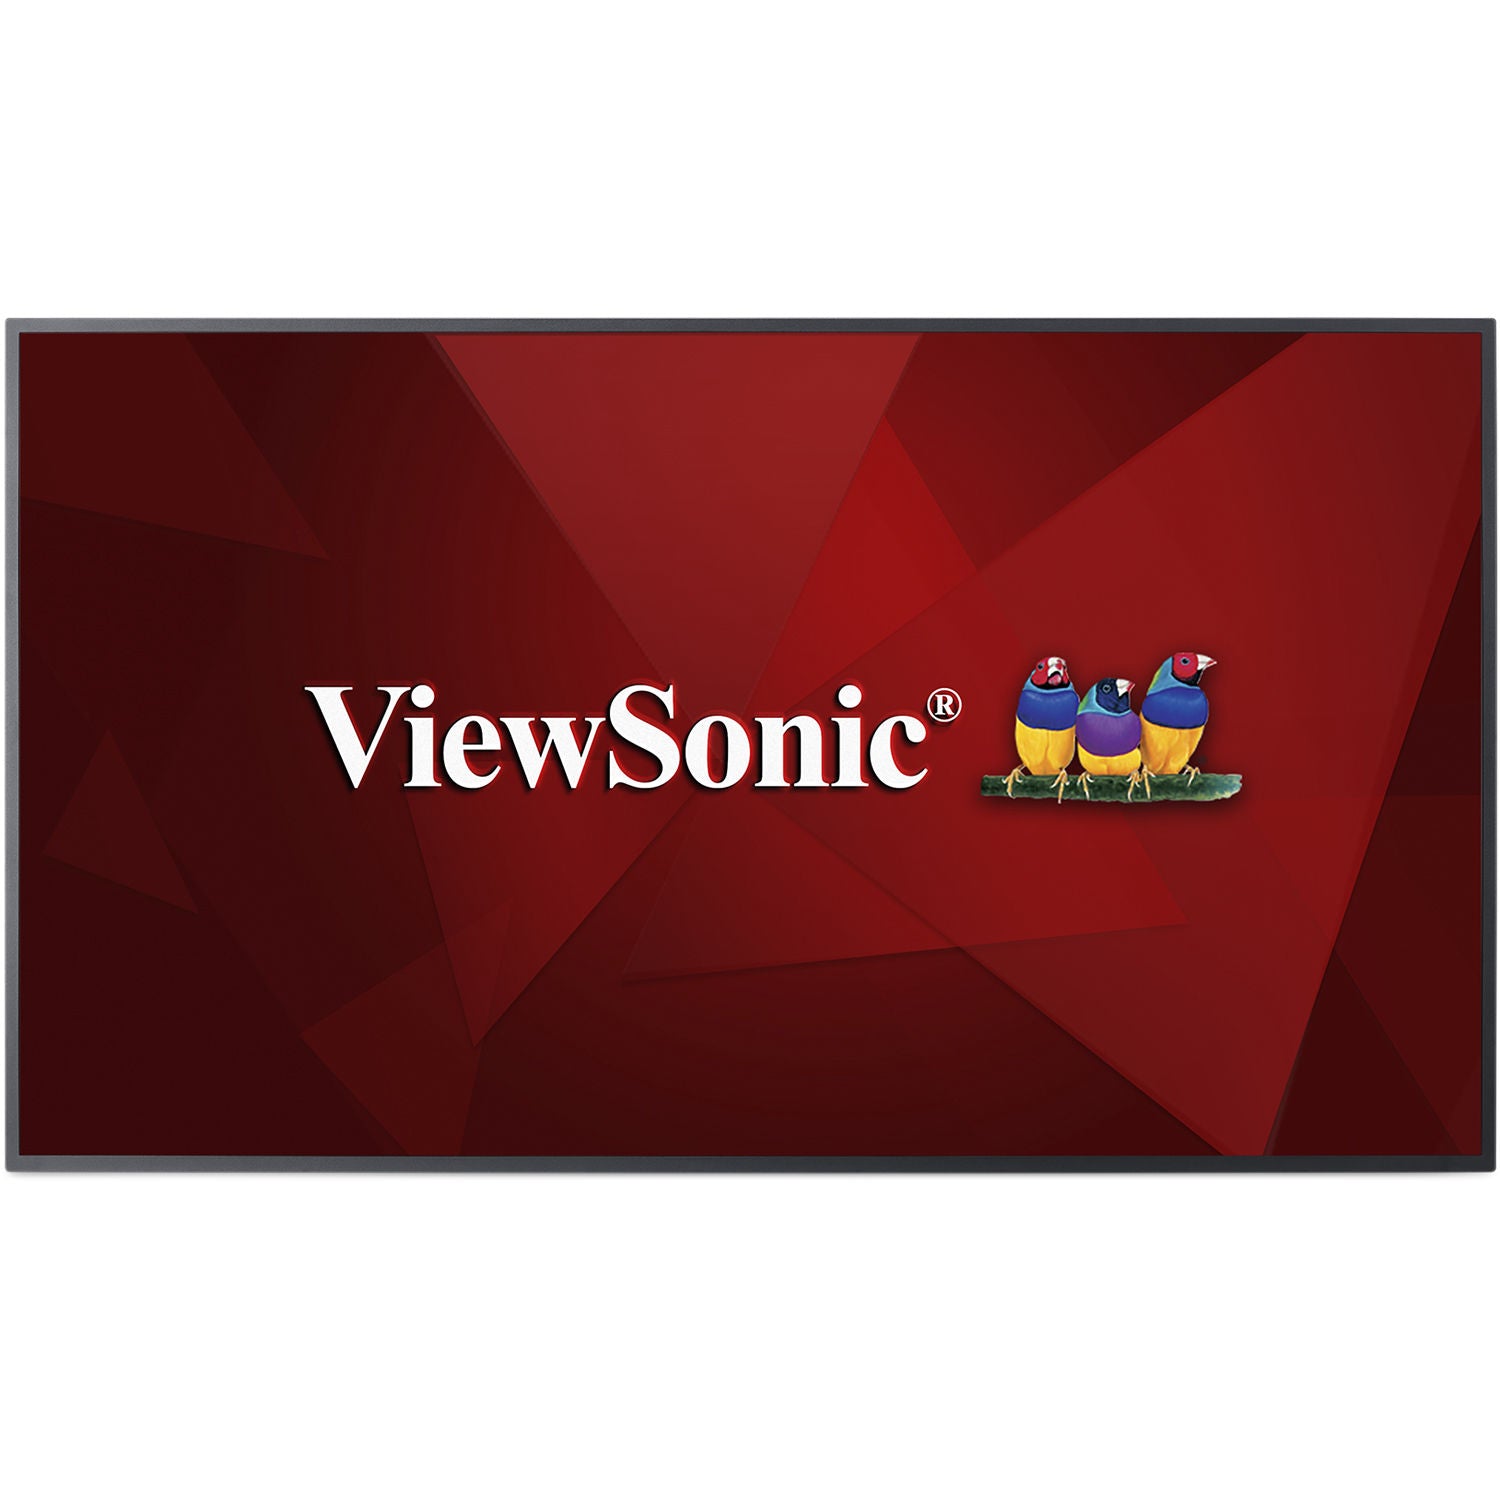 ViewSonic CDE5510-R 55" 4K UHD Quad-Core CPU Commercial Display - Certified Refurbished